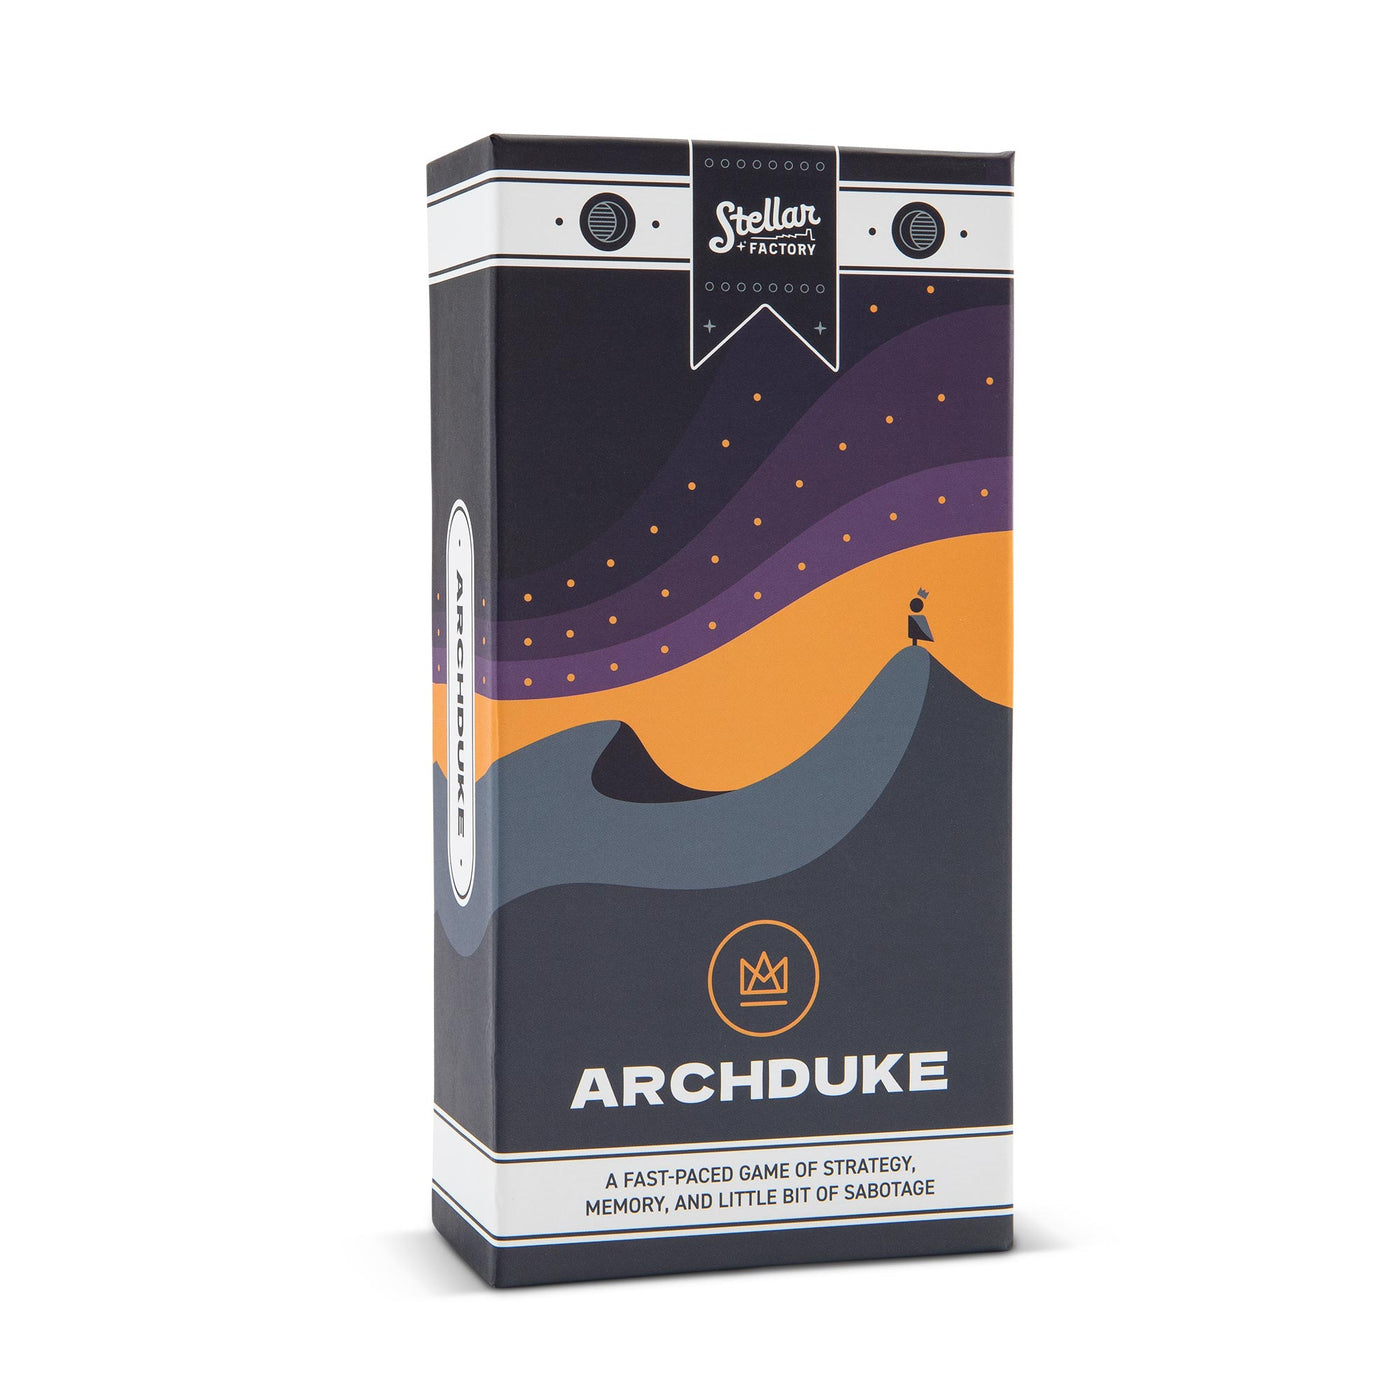 Front of packaging for Archduke game